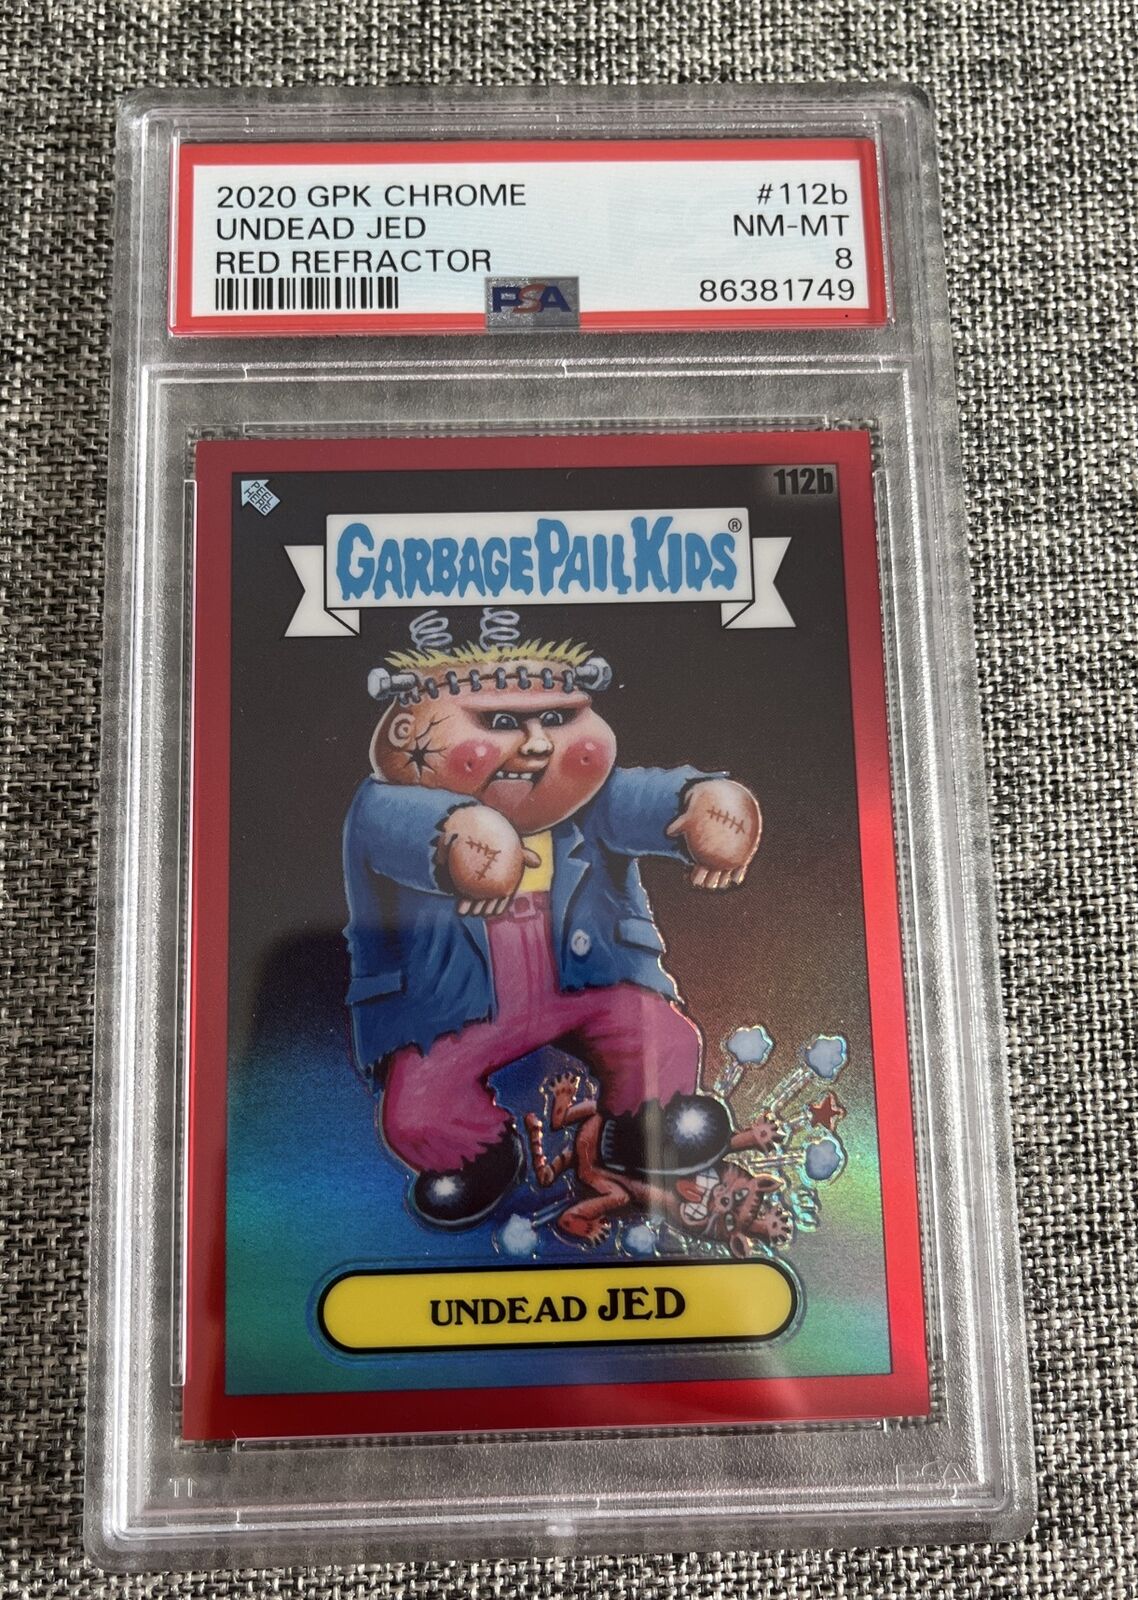 2020 Garbage Pail Kids Chrome Red Refractor Undead Jed PSA 8 #4/5